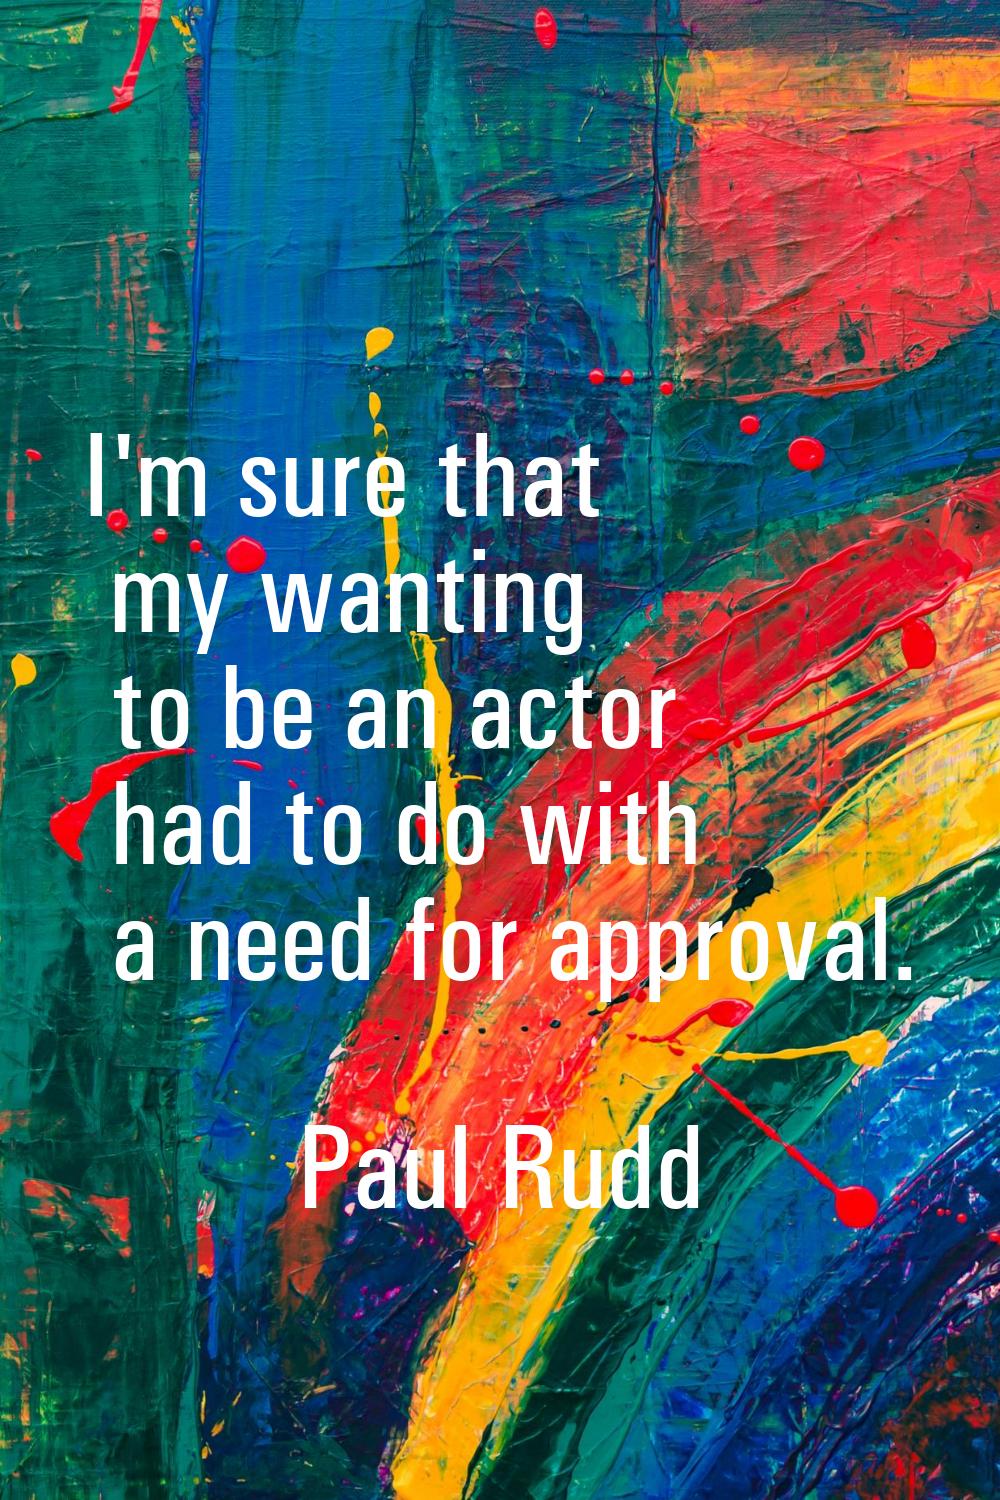 I'm sure that my wanting to be an actor had to do with a need for approval.